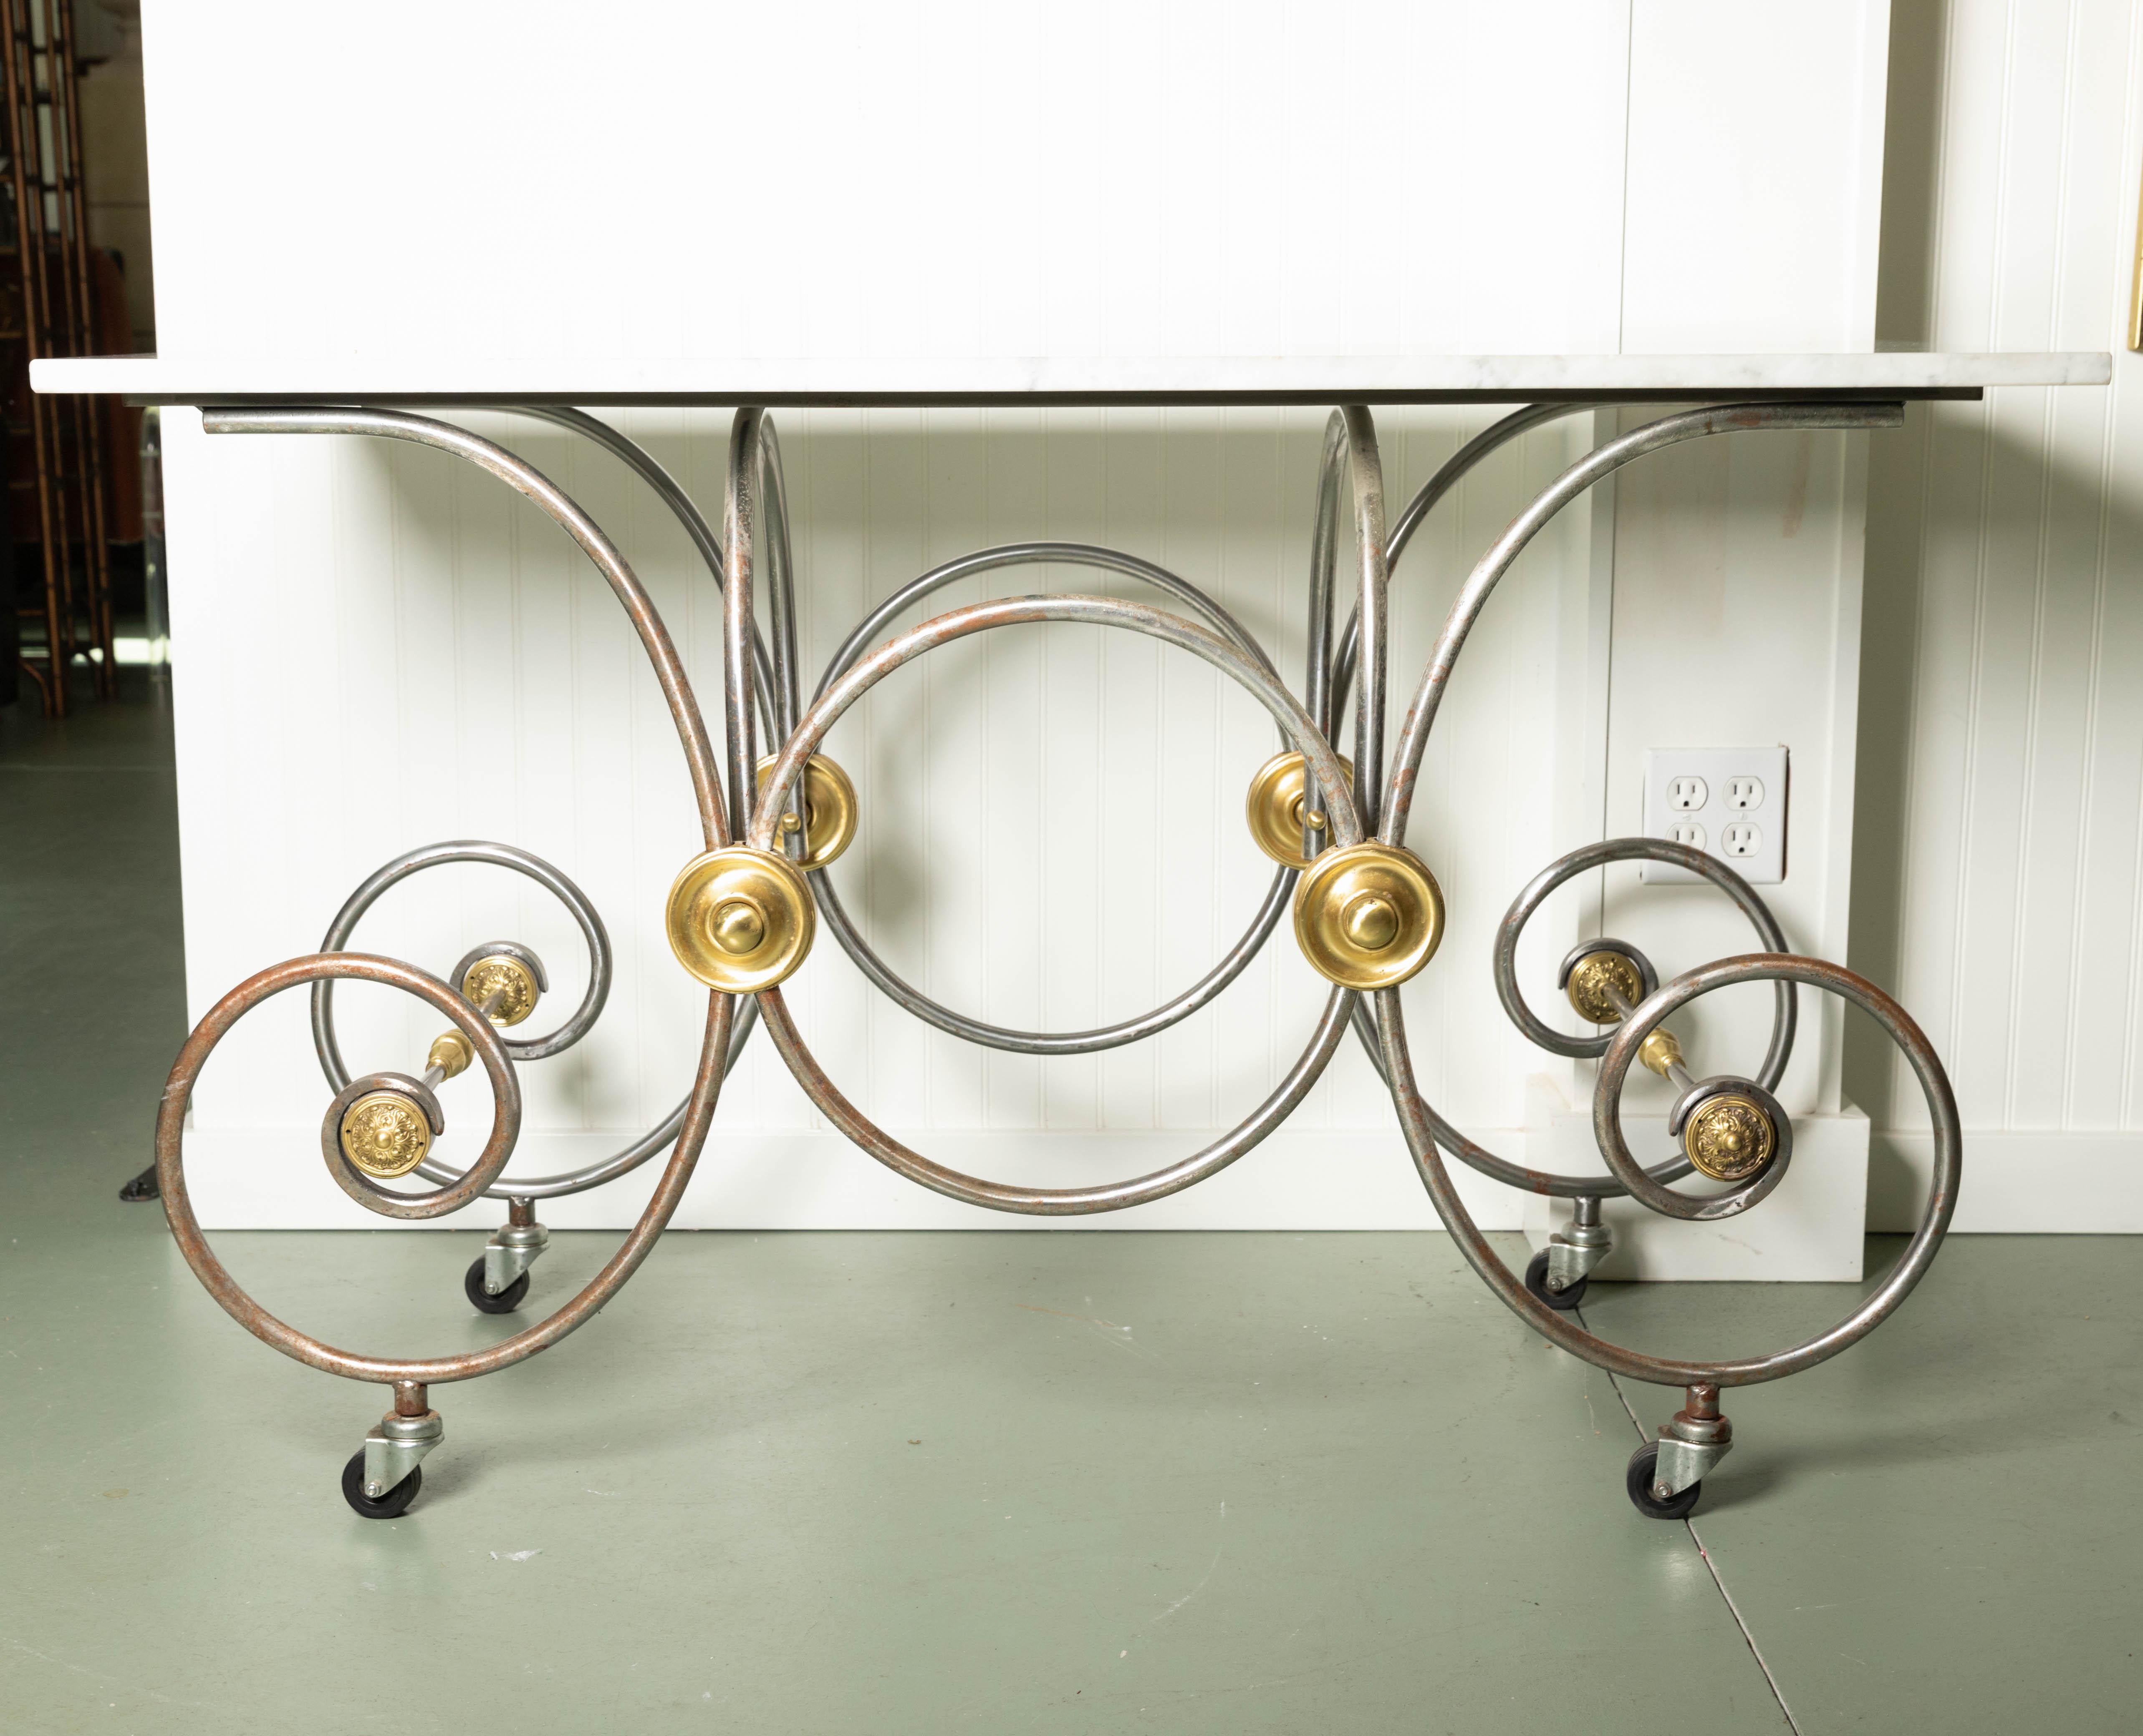 French Style, Marble Top Bakers Table with Brass and Metal Base (Französisch) im Angebot